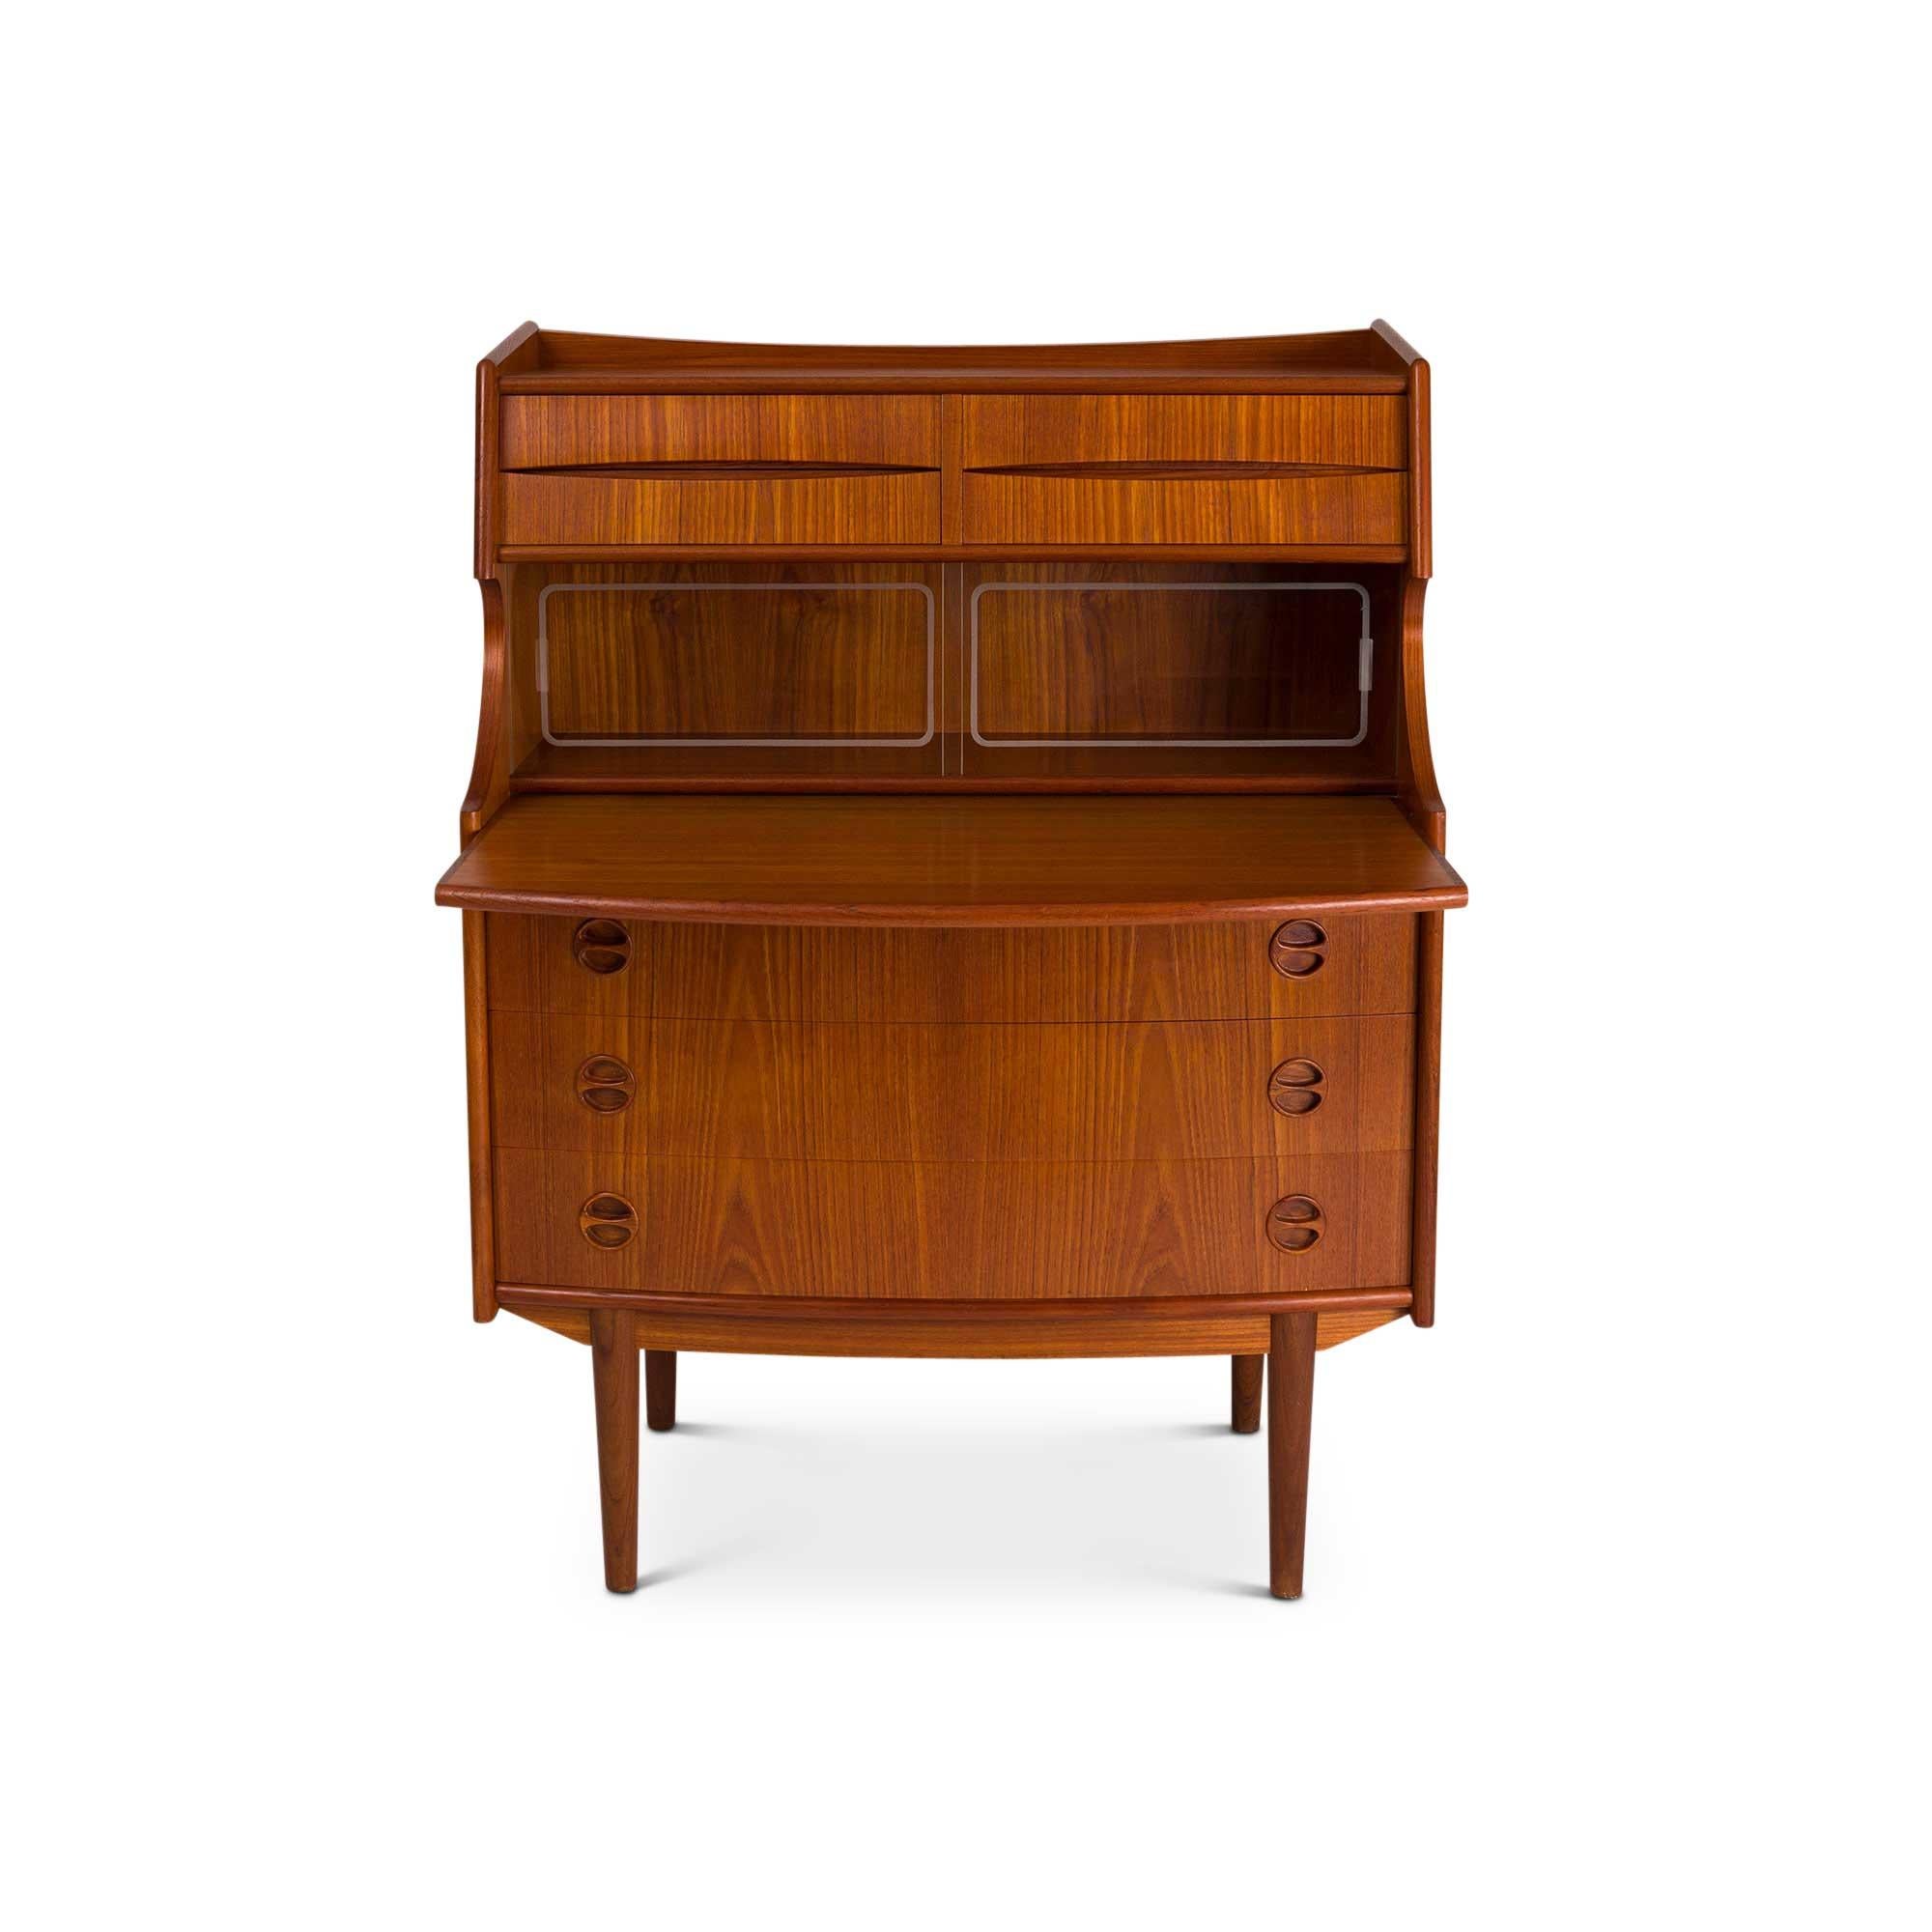 A beautiful Danish teak bureau circa the 1960s with a beautiful teak grain throughout. This bureau features a raised back with two four smaller drawers on top, two sliding etched glass doors over a sliding writing surface, three drawers, and four